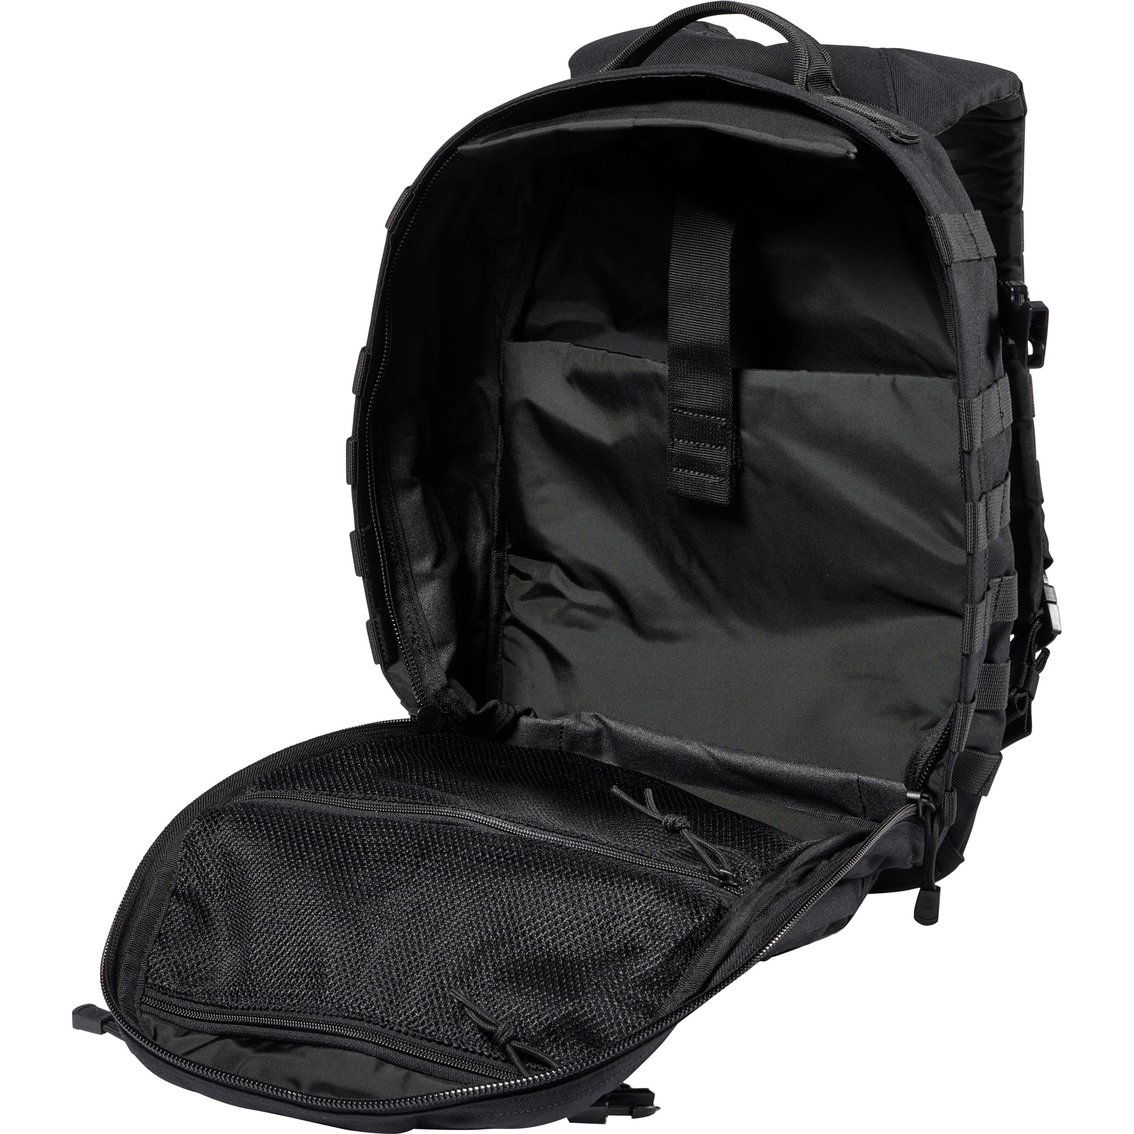 5.11 RUSH 12 2.0 Backpack - Image 7 of 10